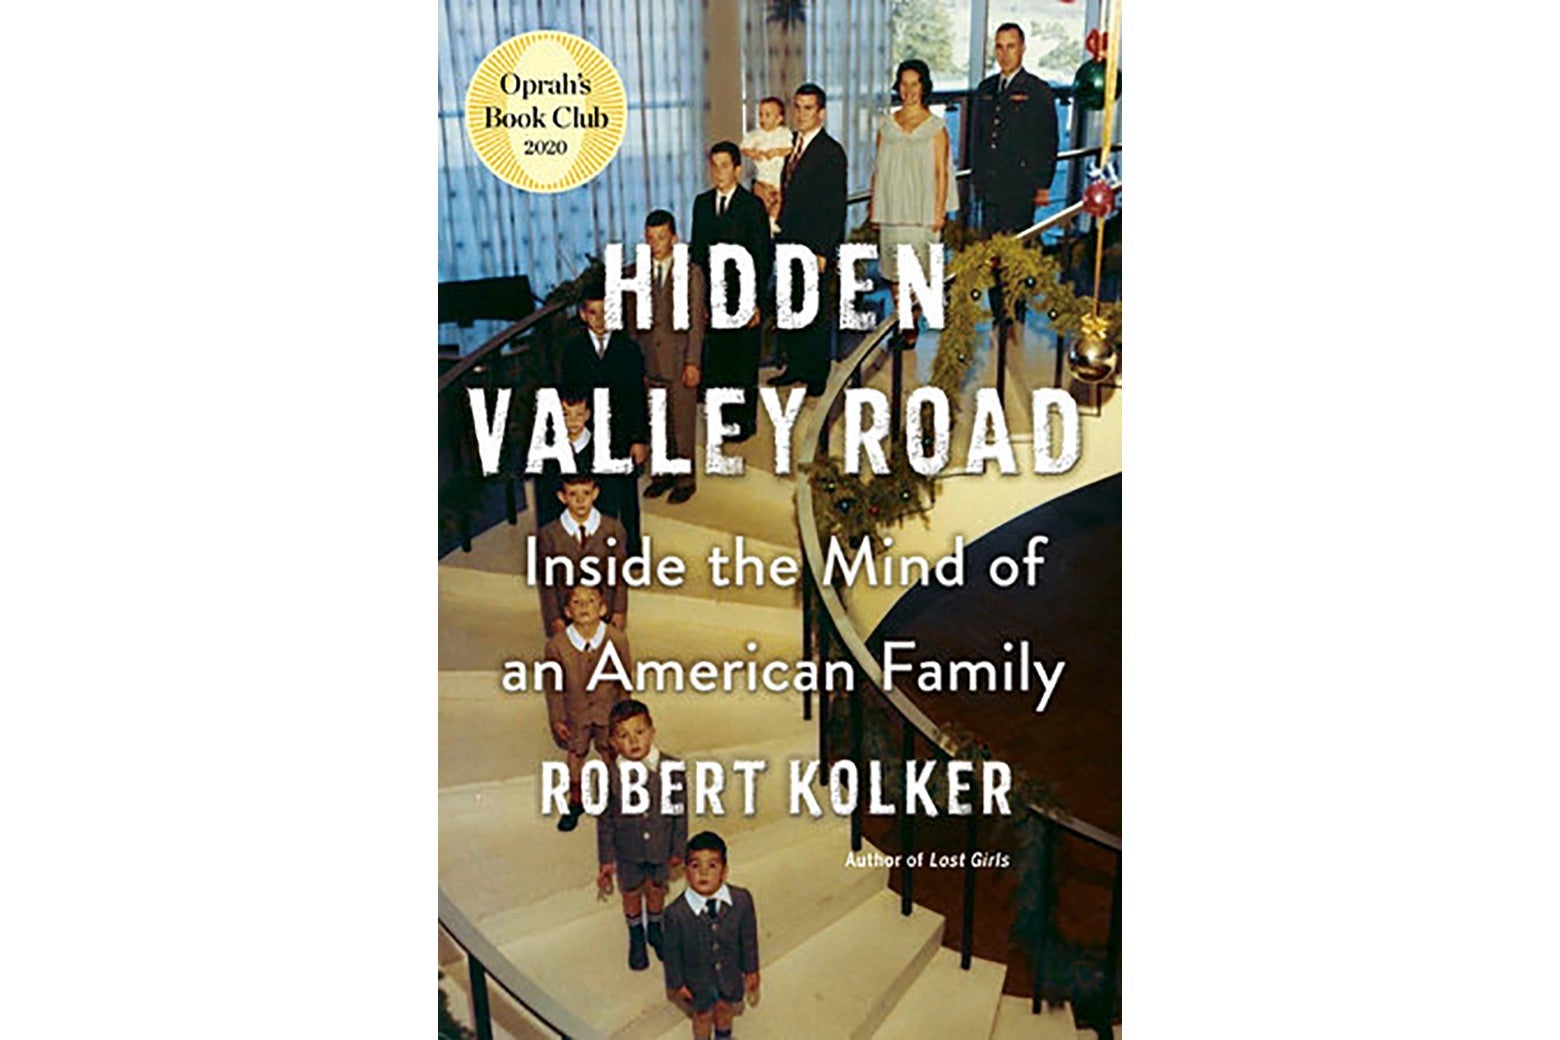 The cover of Hidden Valley Road.